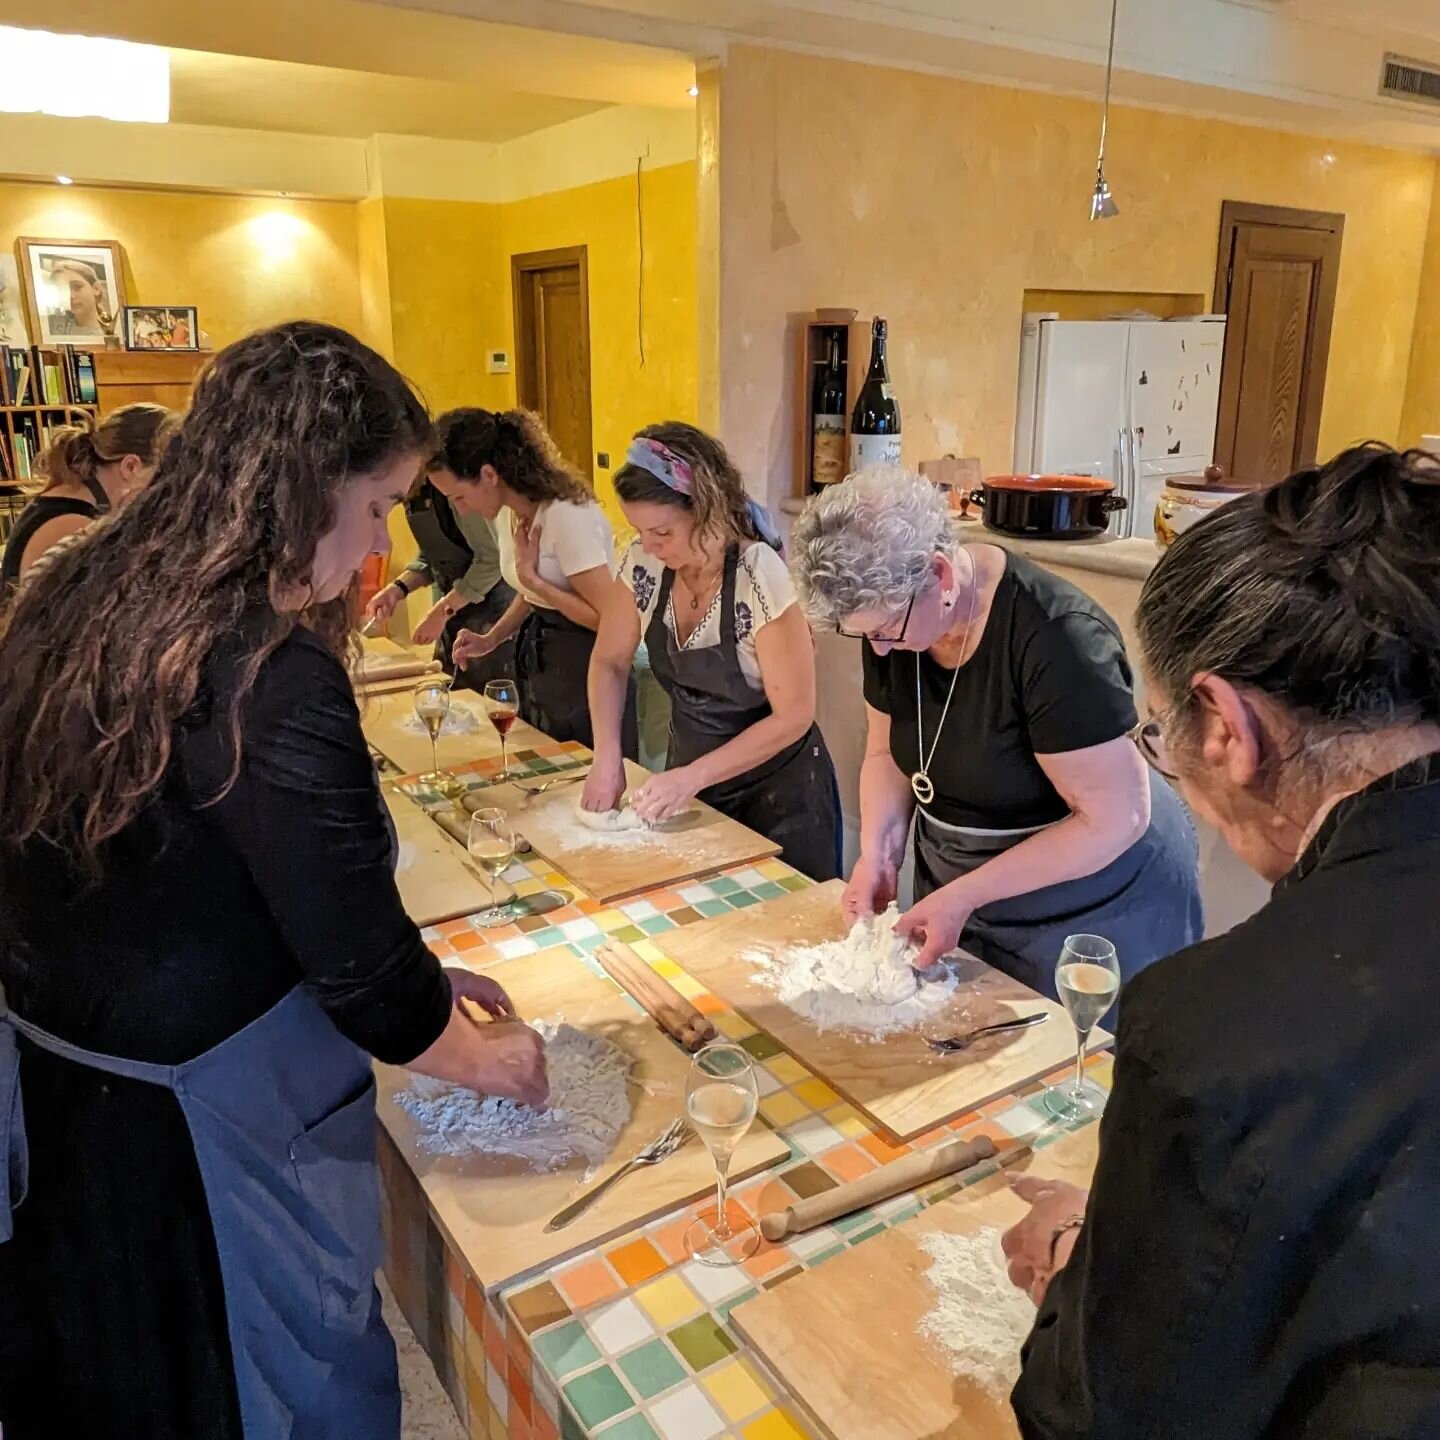 We had a cooking lesson tonight where we learned to make homemade pici (pronounced pea-she), chicken alla cacciatora, cantucci (i.e. biscotti) and kohlrabi greens. What an amazing evening!!

.

.

.

#hikingadventures #hike⁠
#tuscanydreams #discovert